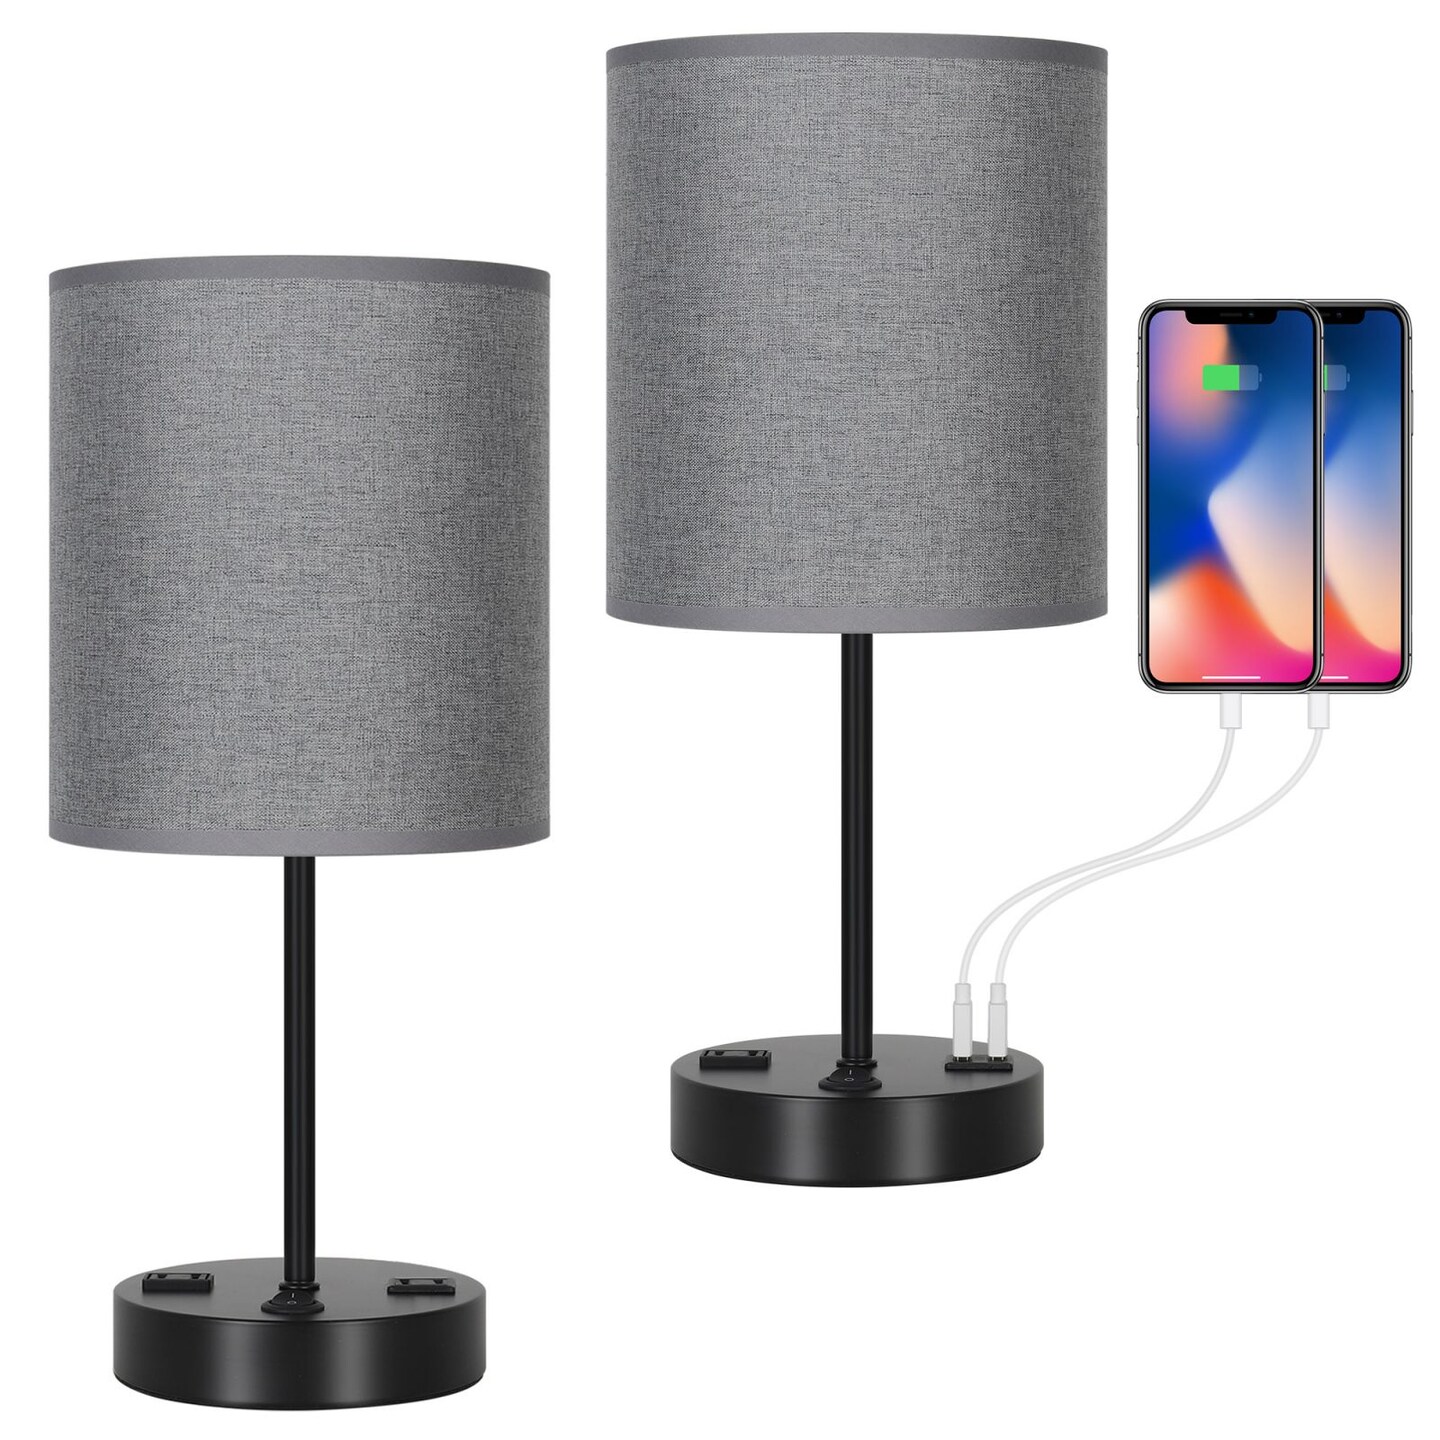 Bedside Table Lamps Nightstand Lamps with USB Port and Outlet, Bedside Lamps with USB Charging Port